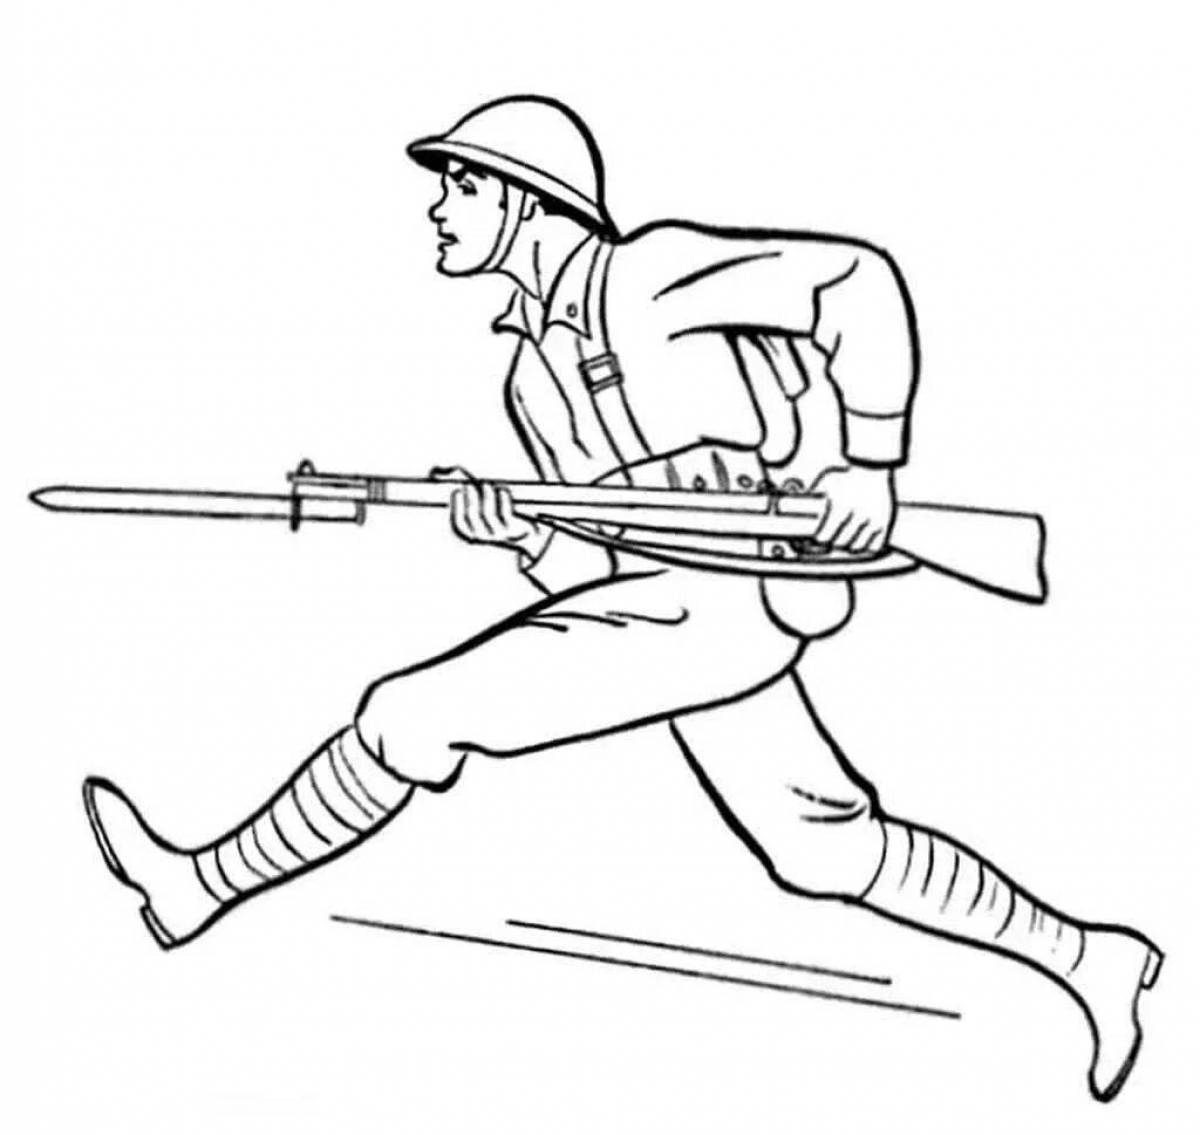 Great coloring pages soldiers of different branches of the military for children